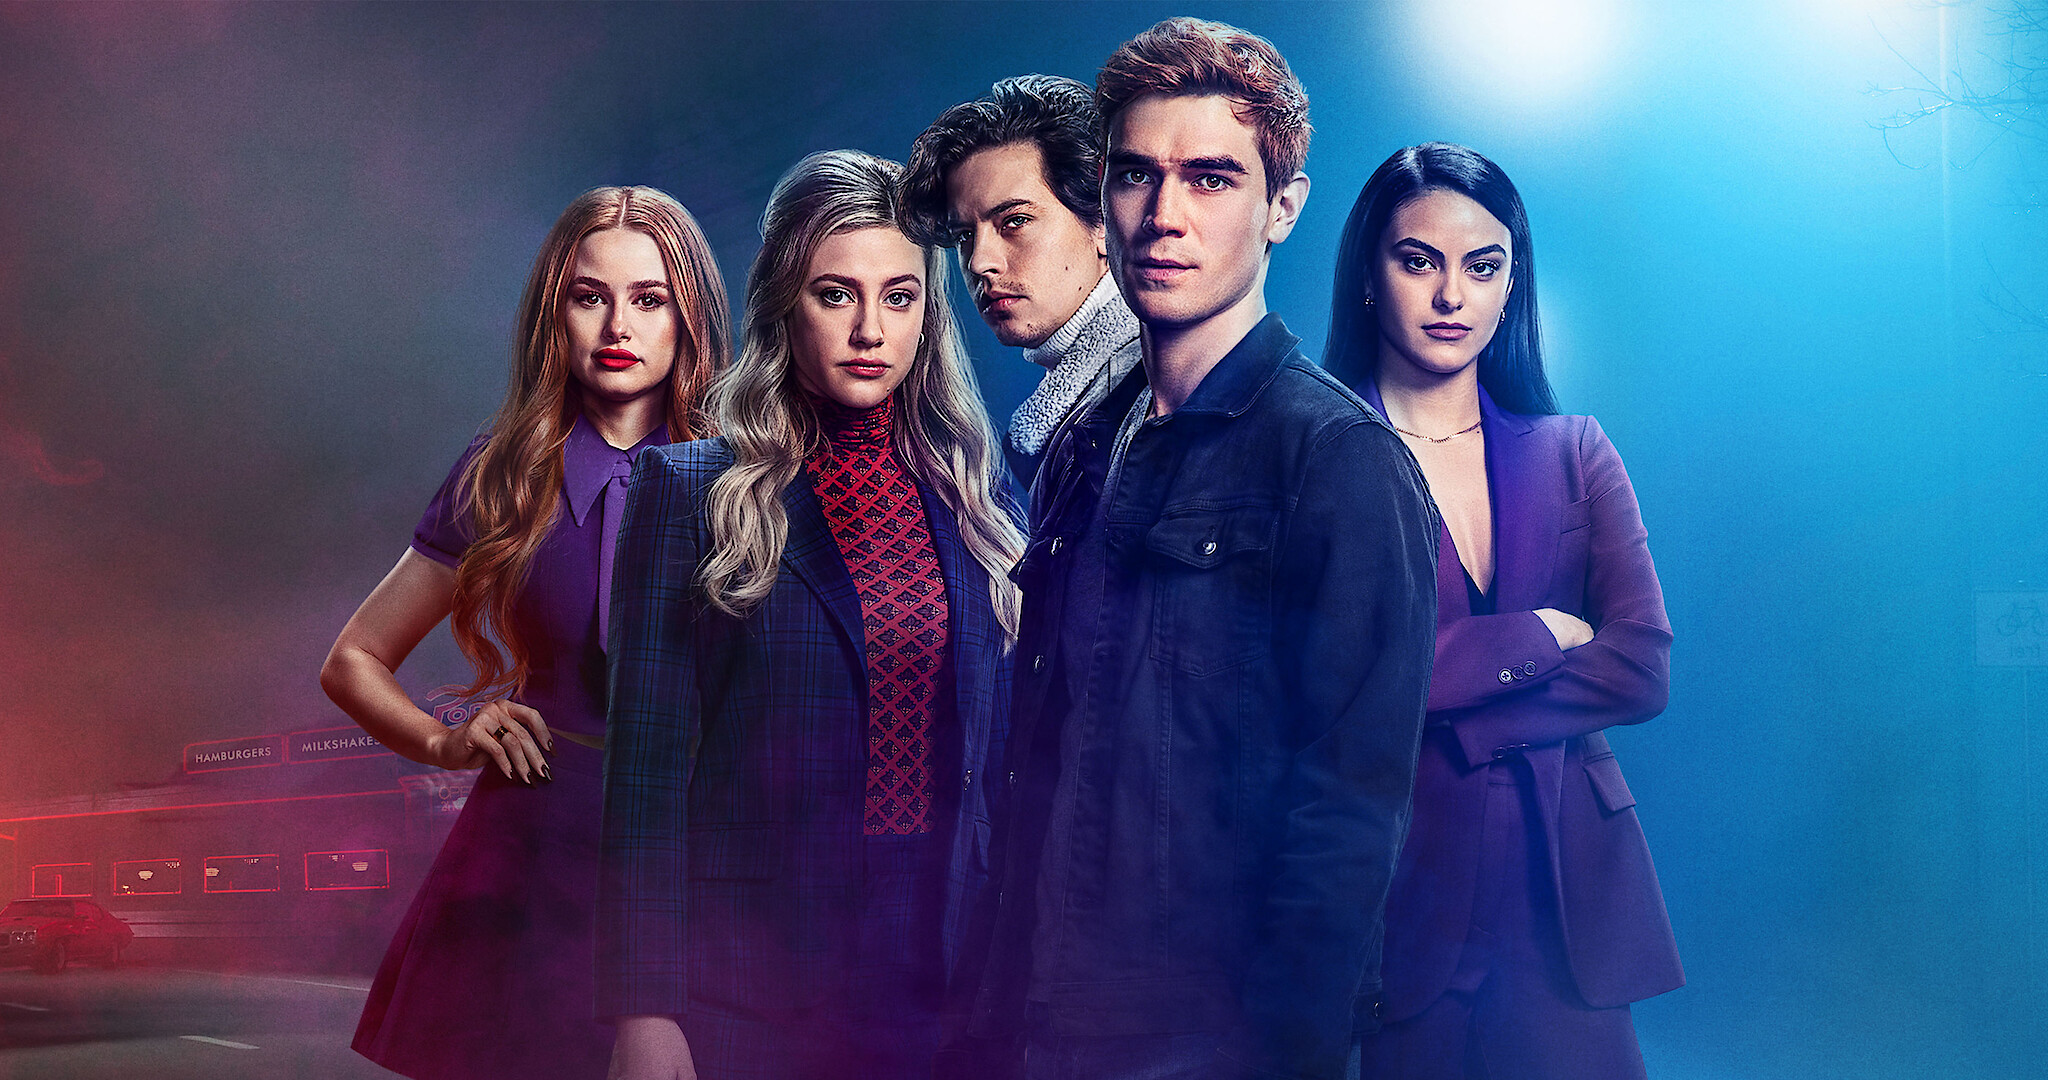 Riverdale Season 7: Release Date, Synopsis, and More Details on